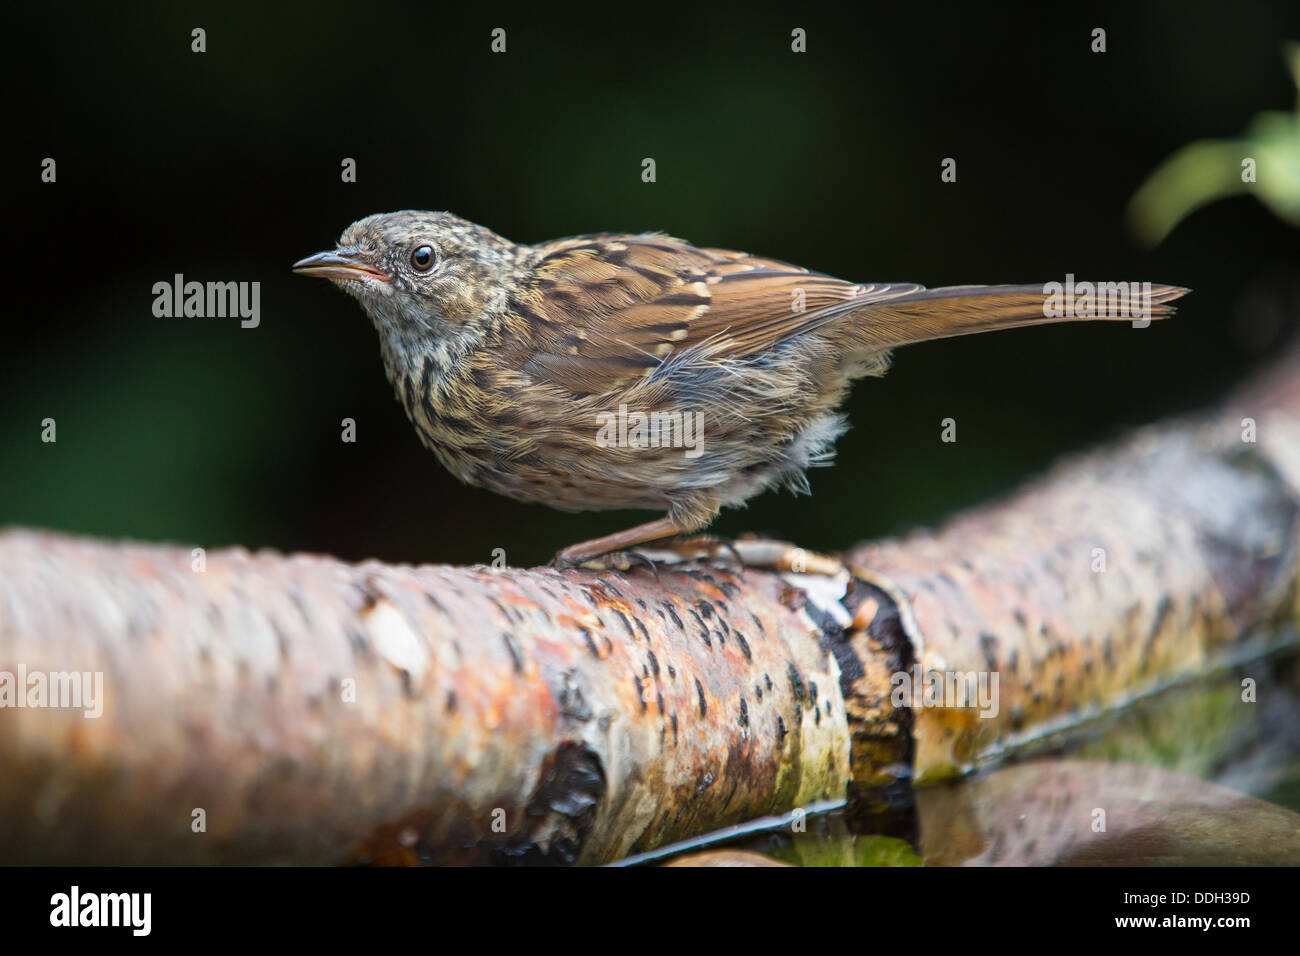 Close-up of a Dunnock (Prunella modularis) balancing on a branch in a garden pond, side view (also called hedge sparrow) Stock Photo